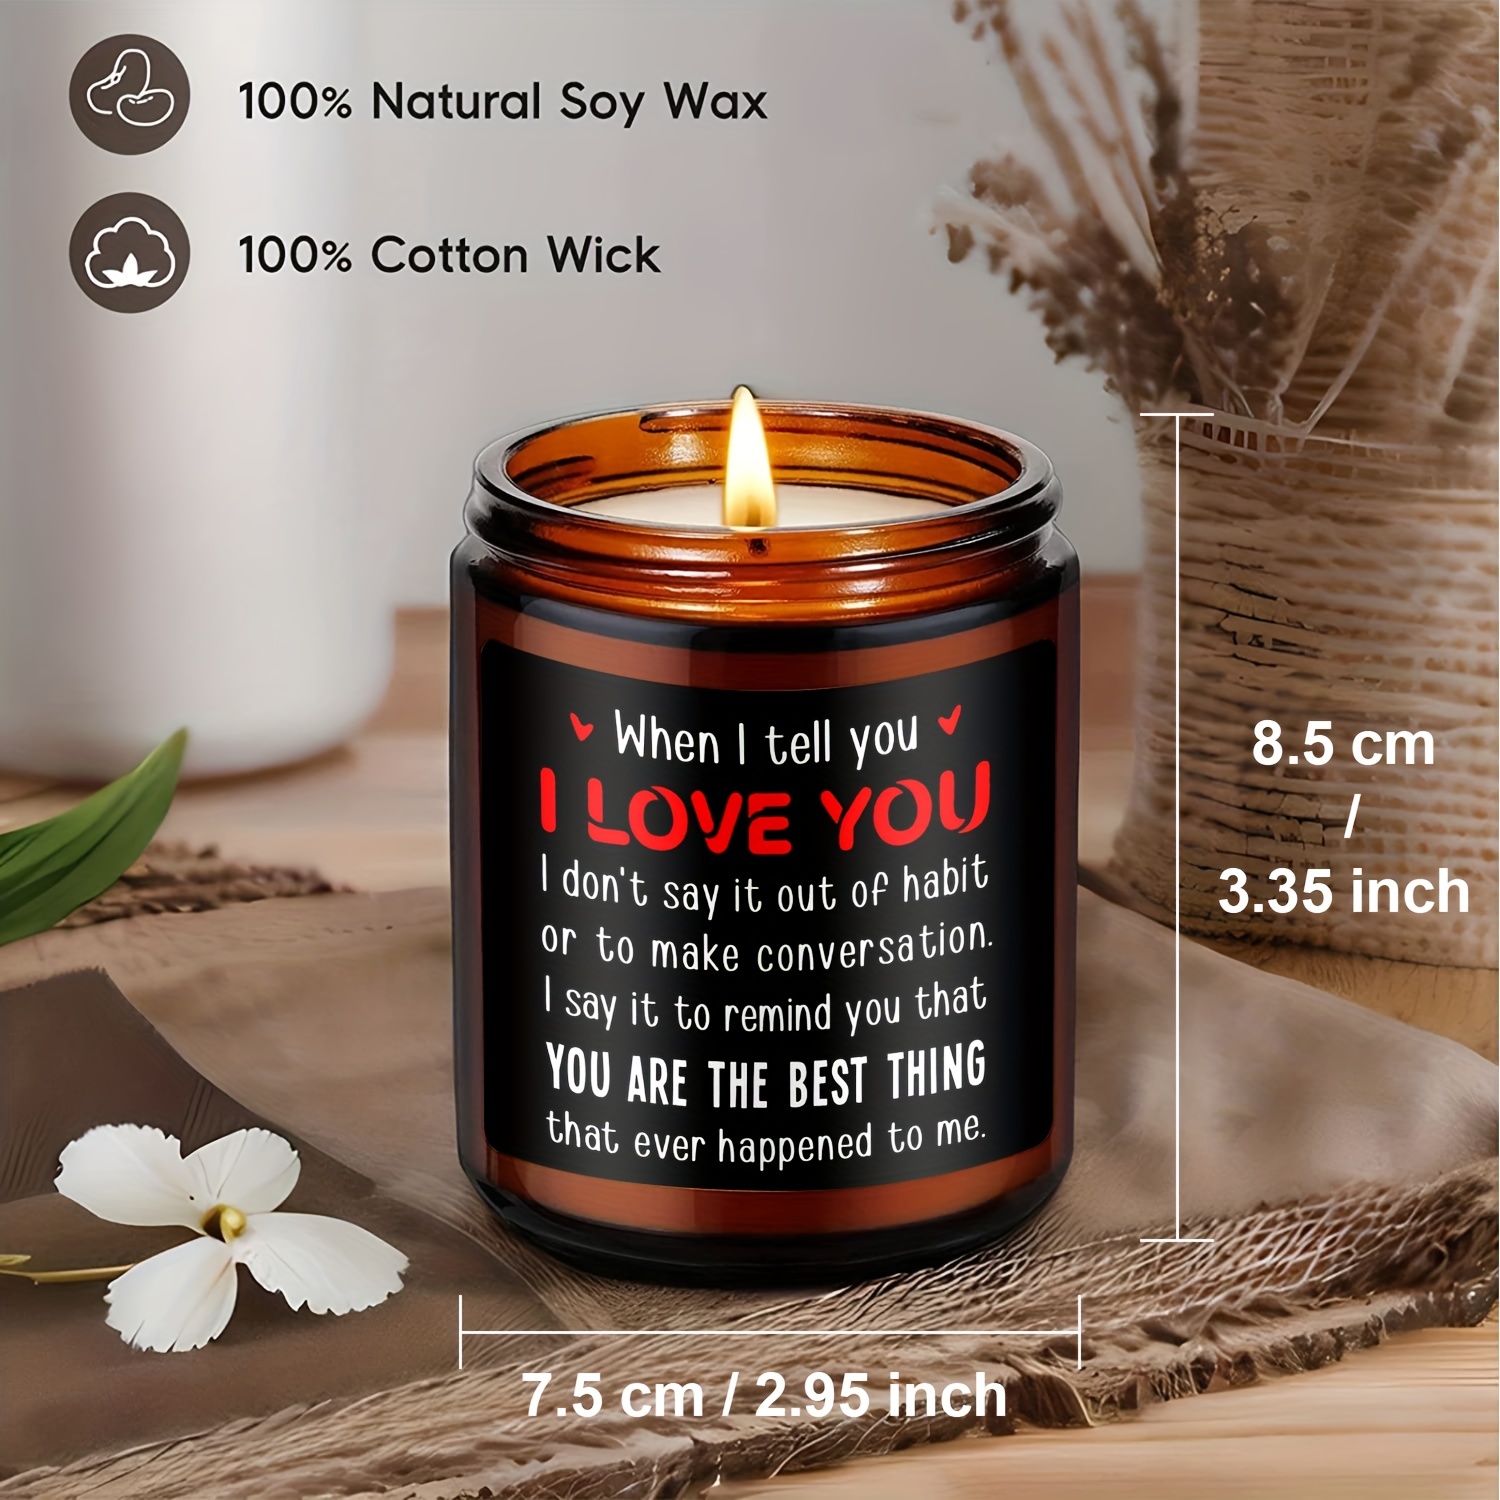 Get Lit Candle, Funny Adult Couples Candle, Funny Gifts for Him or